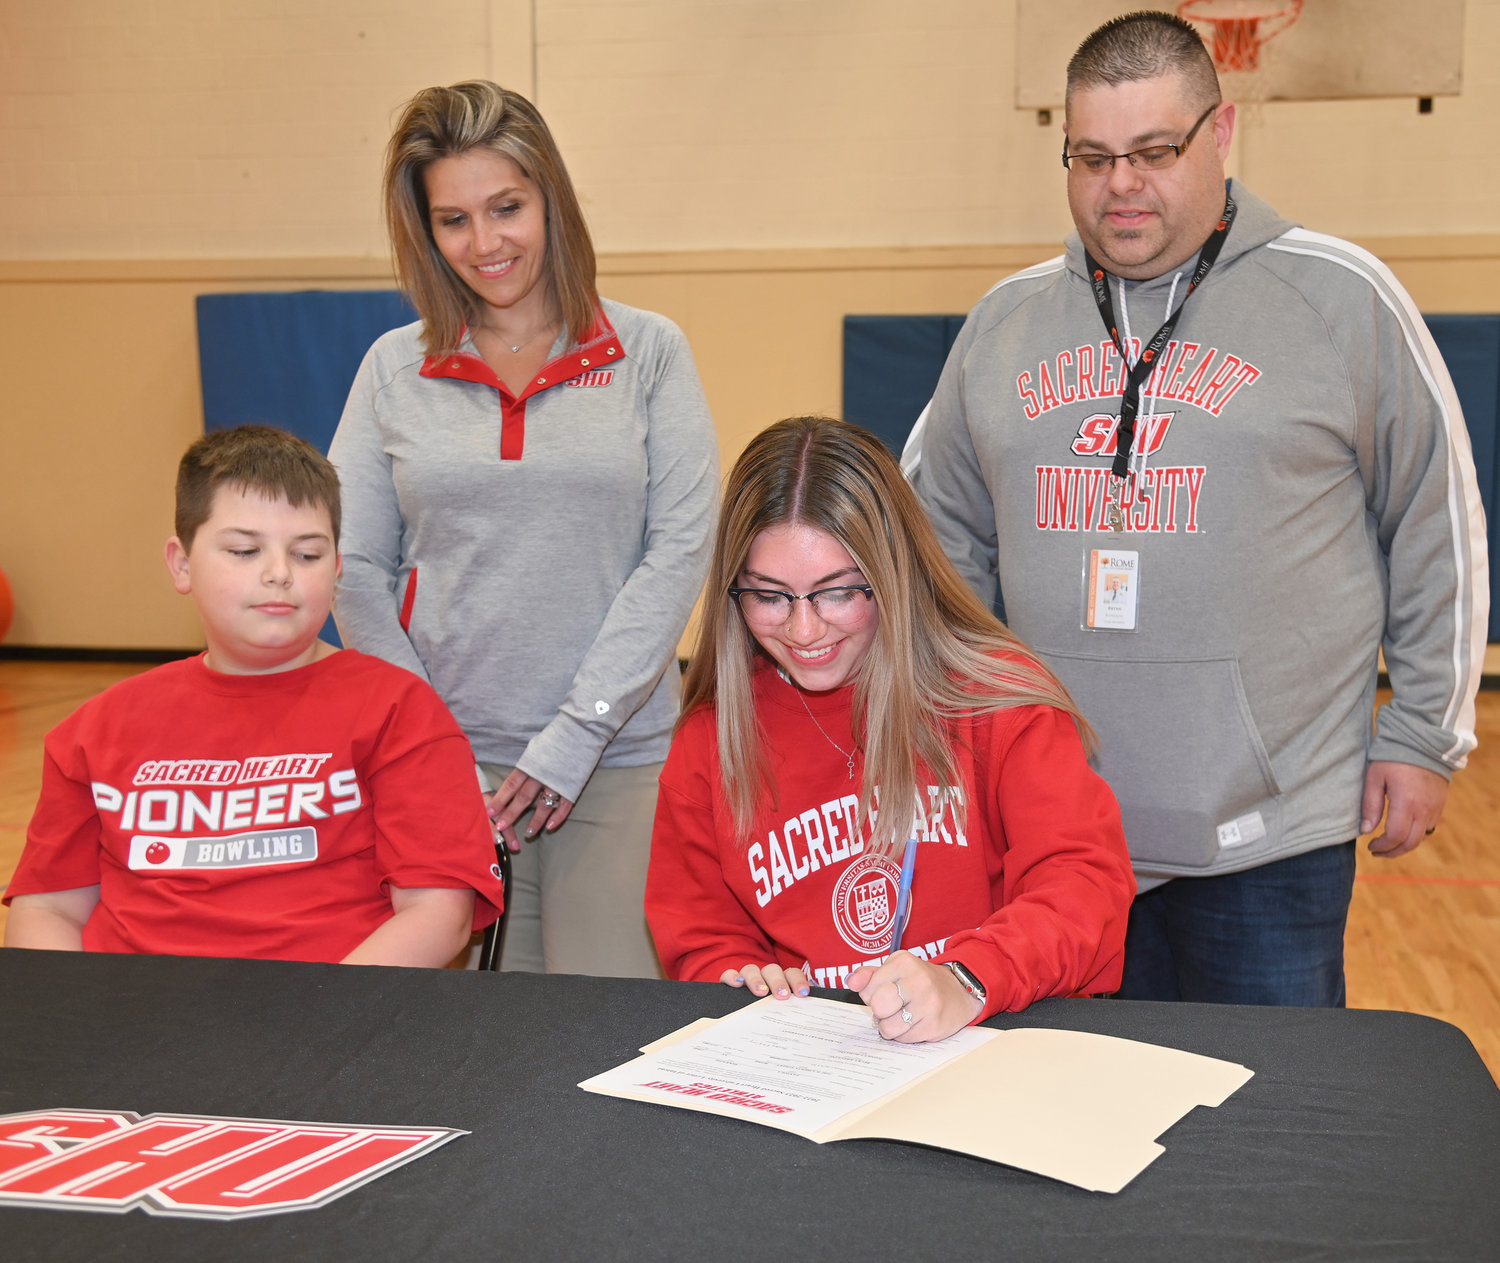 Rome Free Academy senior bowler McKenzie Pantola signs her National Letter of Intent on Monday to bowl in the fall at Division I Sacred Heart University in Fairfield, Conn. Seated next to her are brother Steven Pantola Jr. Behind her mother Amber Presky and RFA girls bowling coach Bryan Rondeau. Pantola is a five-year varsity starter and captain of the RFA girls bowling team. This year she achieved Tri-Valley League high average, which allowed her to compete at the New York State Public High School Athletic Association championship in Syracuse, where her and her teammates won to become state champions. Pantola also qualified as a member on the TVL all-star team the past four years.